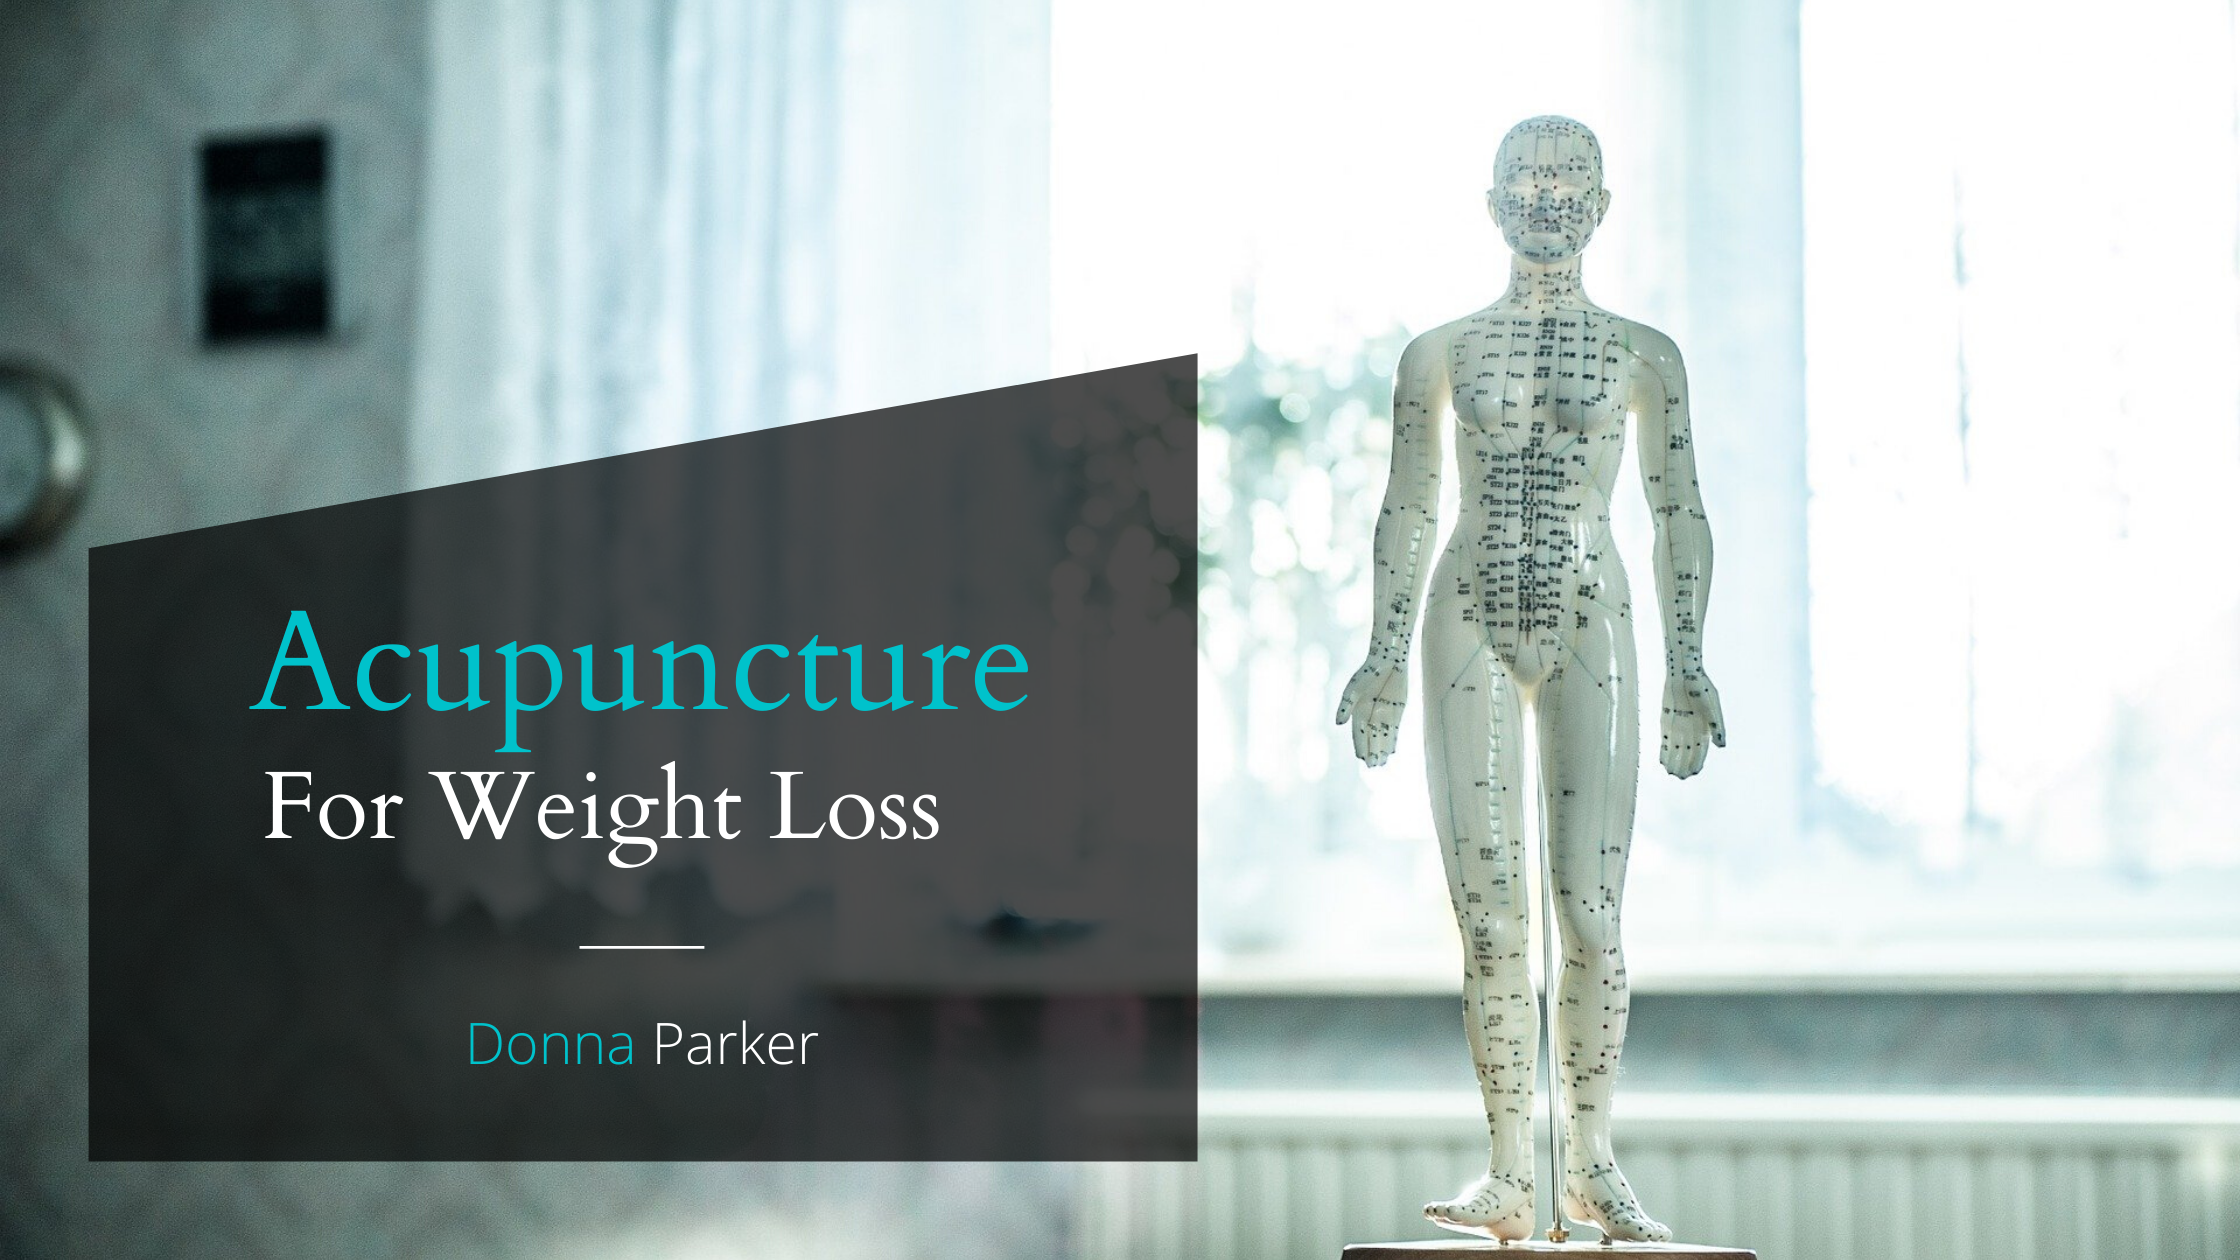 Acupuncture mannequin for weight loss standing near the window.